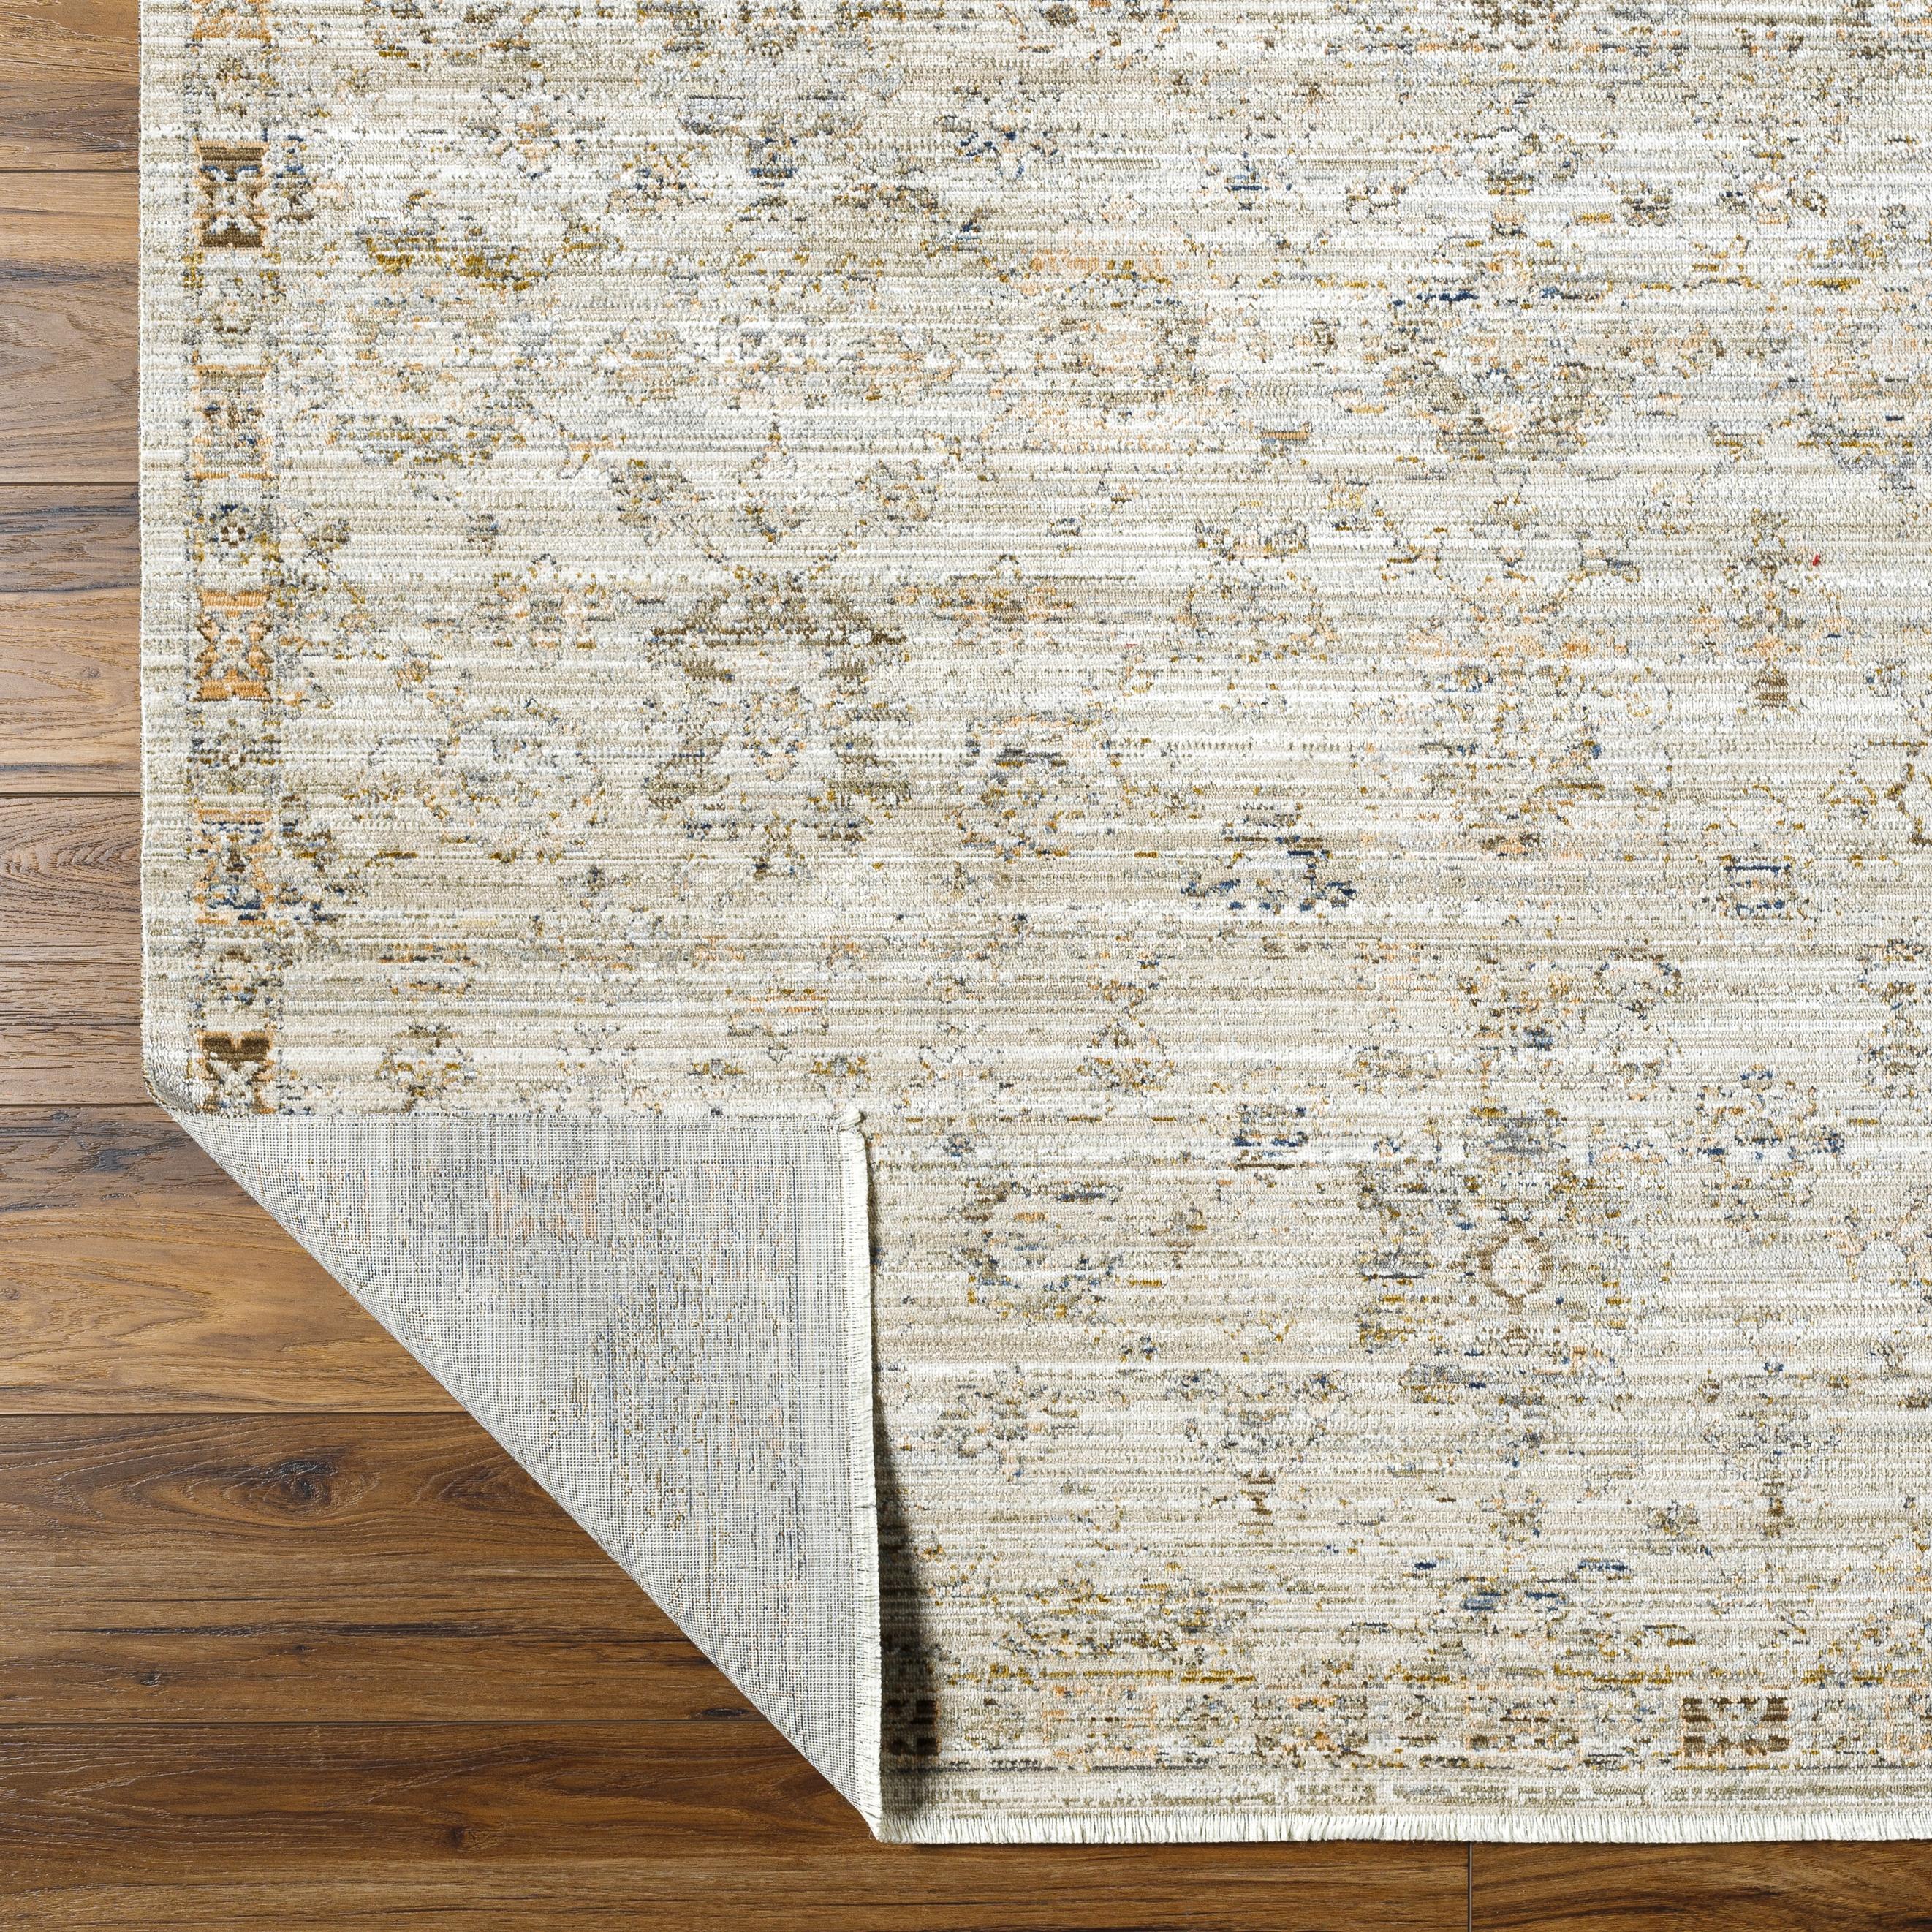 Introducing the Margaret area rug, the perfect piece to bring your space to life! This beautiful collaboration between Surya and Becki Owens features a vintage feel that is sure to be a statement piece in any room. Amethyst Home provides interior design, new home construction design consulting, vintage area rugs, and lighting in the Charlotte metro area.